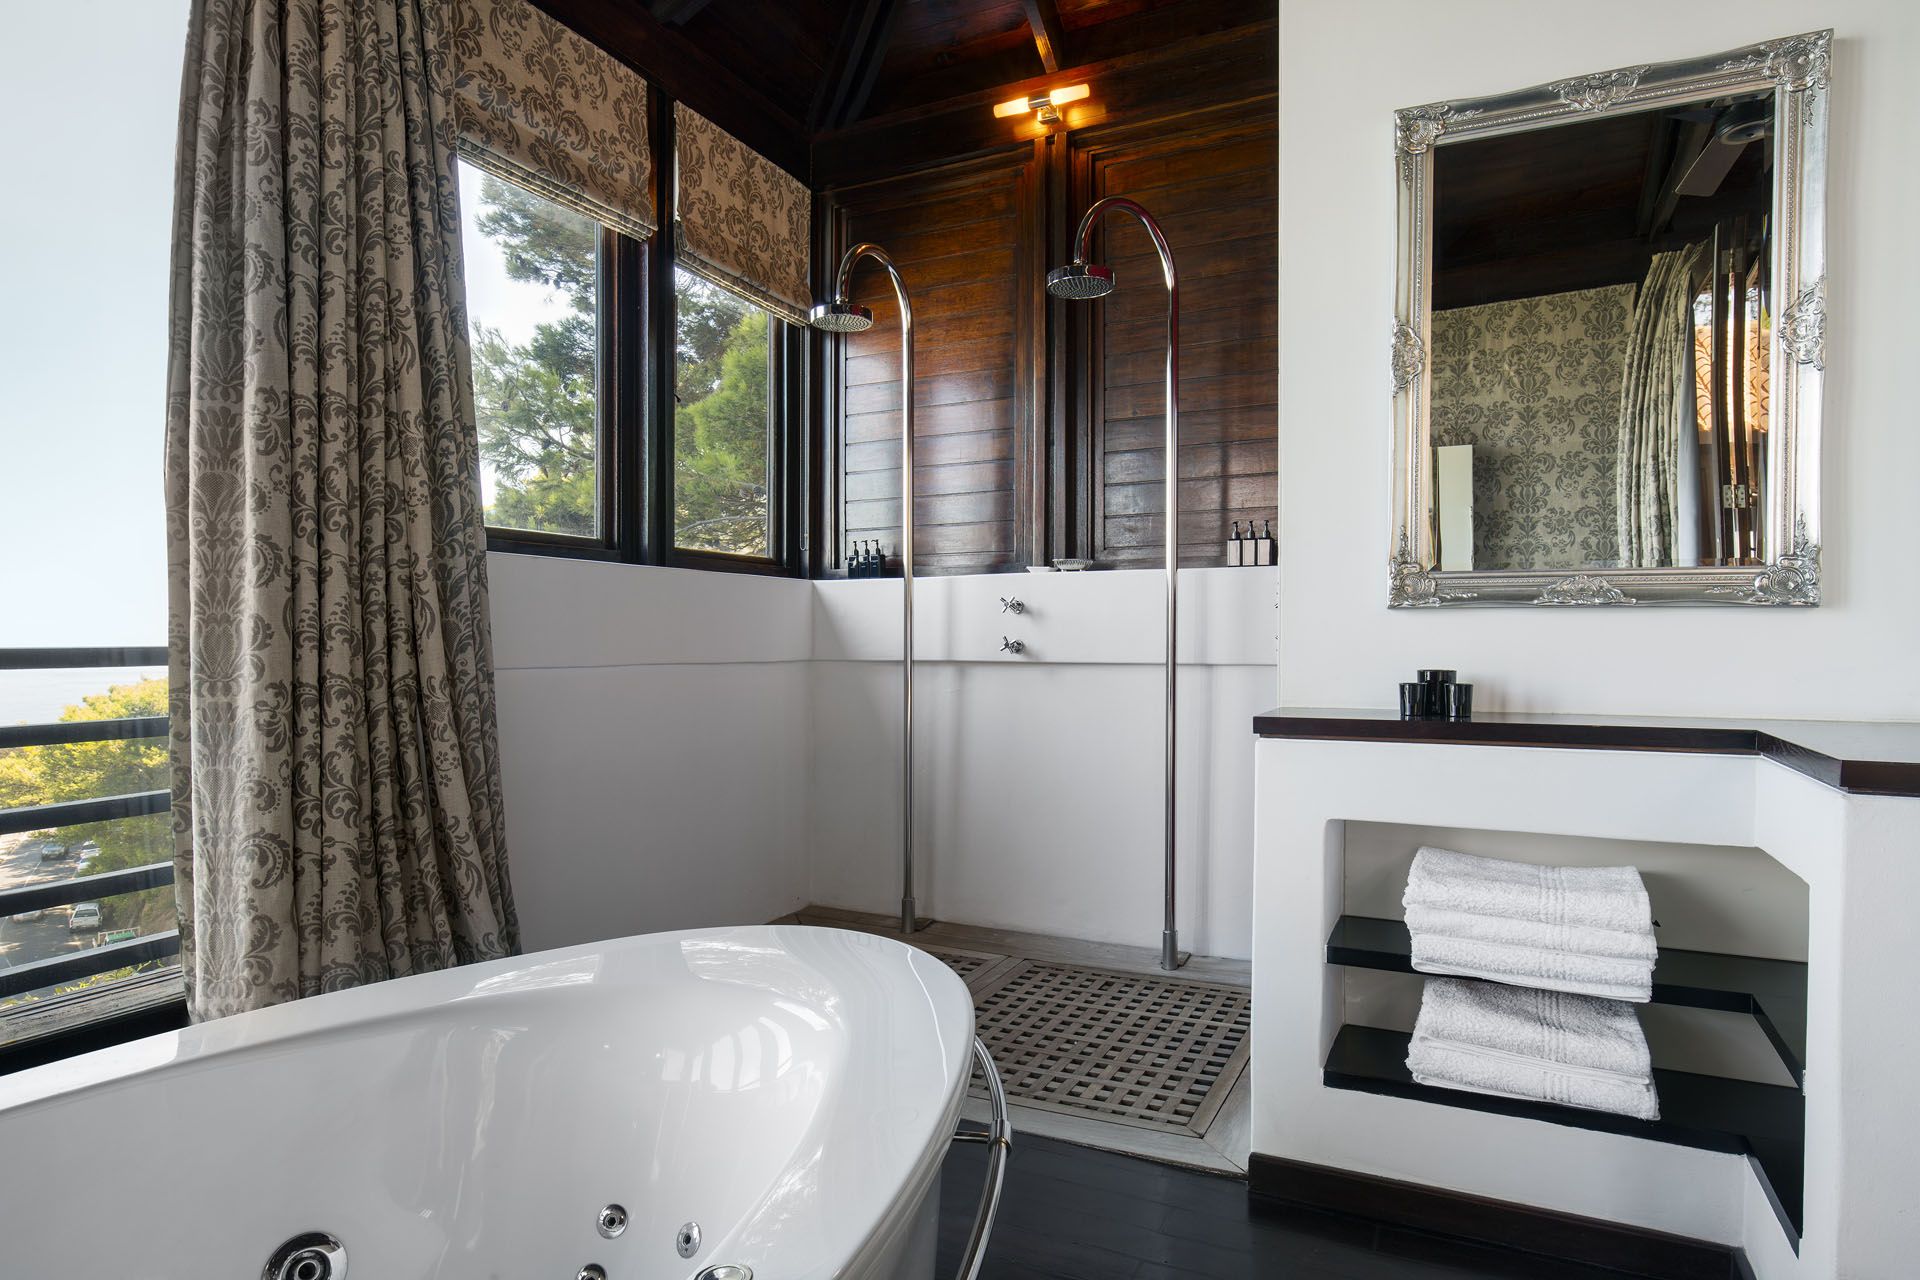 Photo 18 of 141 Kloof Road Villa accommodation in Clifton, Cape Town with 4 bedrooms and 4 bathrooms